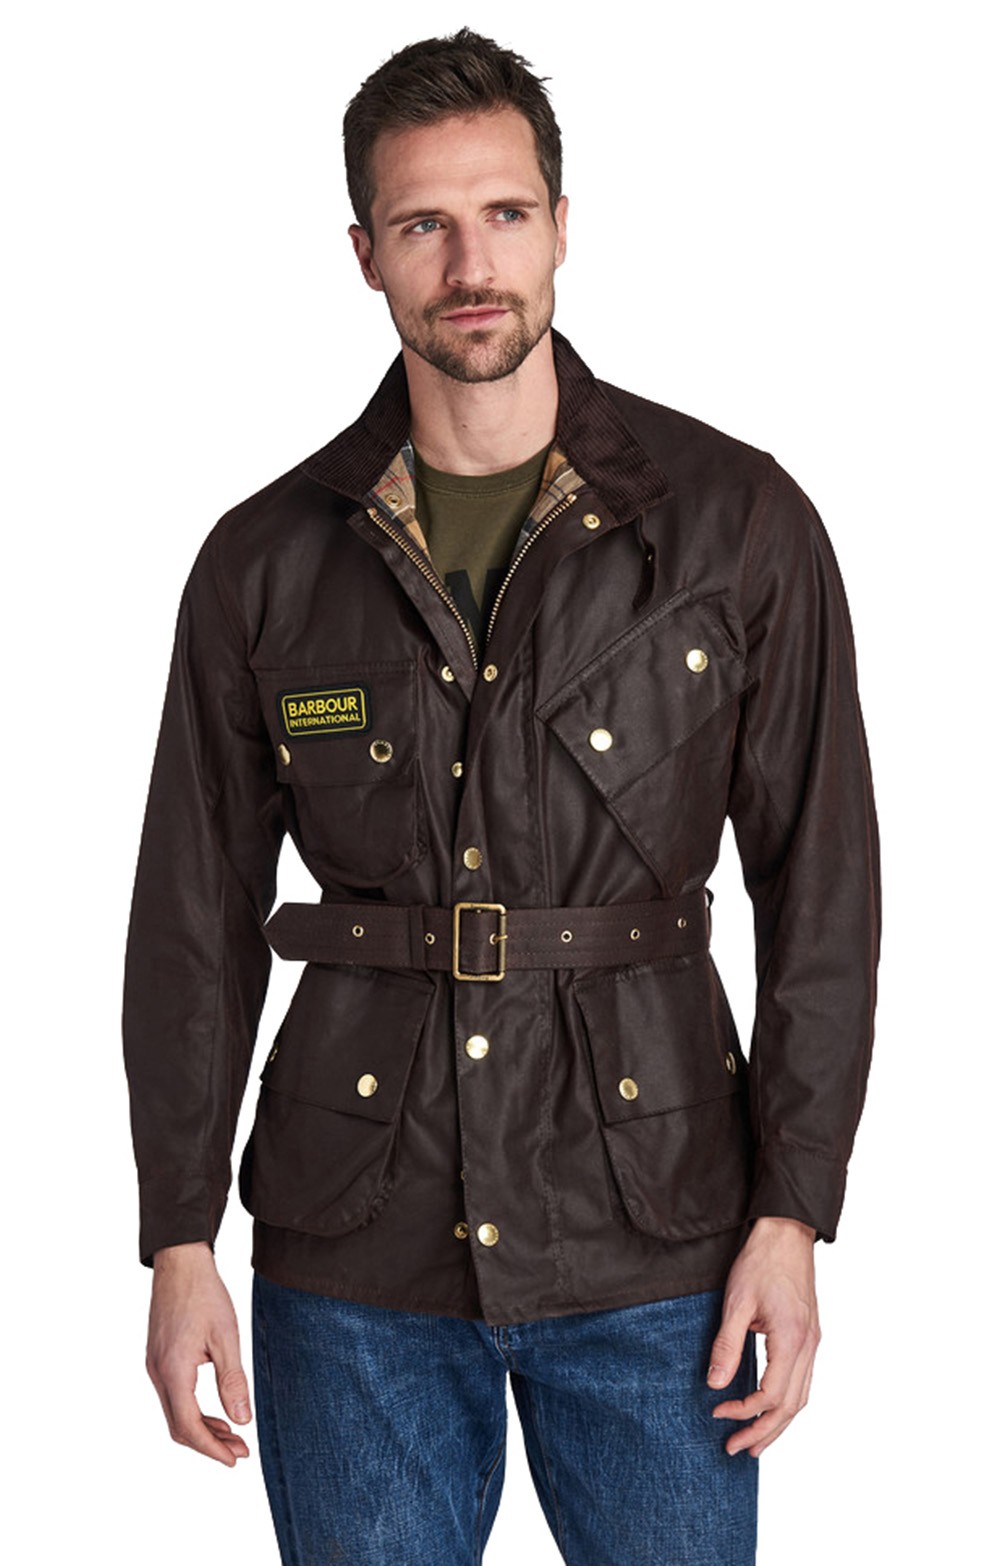 how much is a barbour international jacket